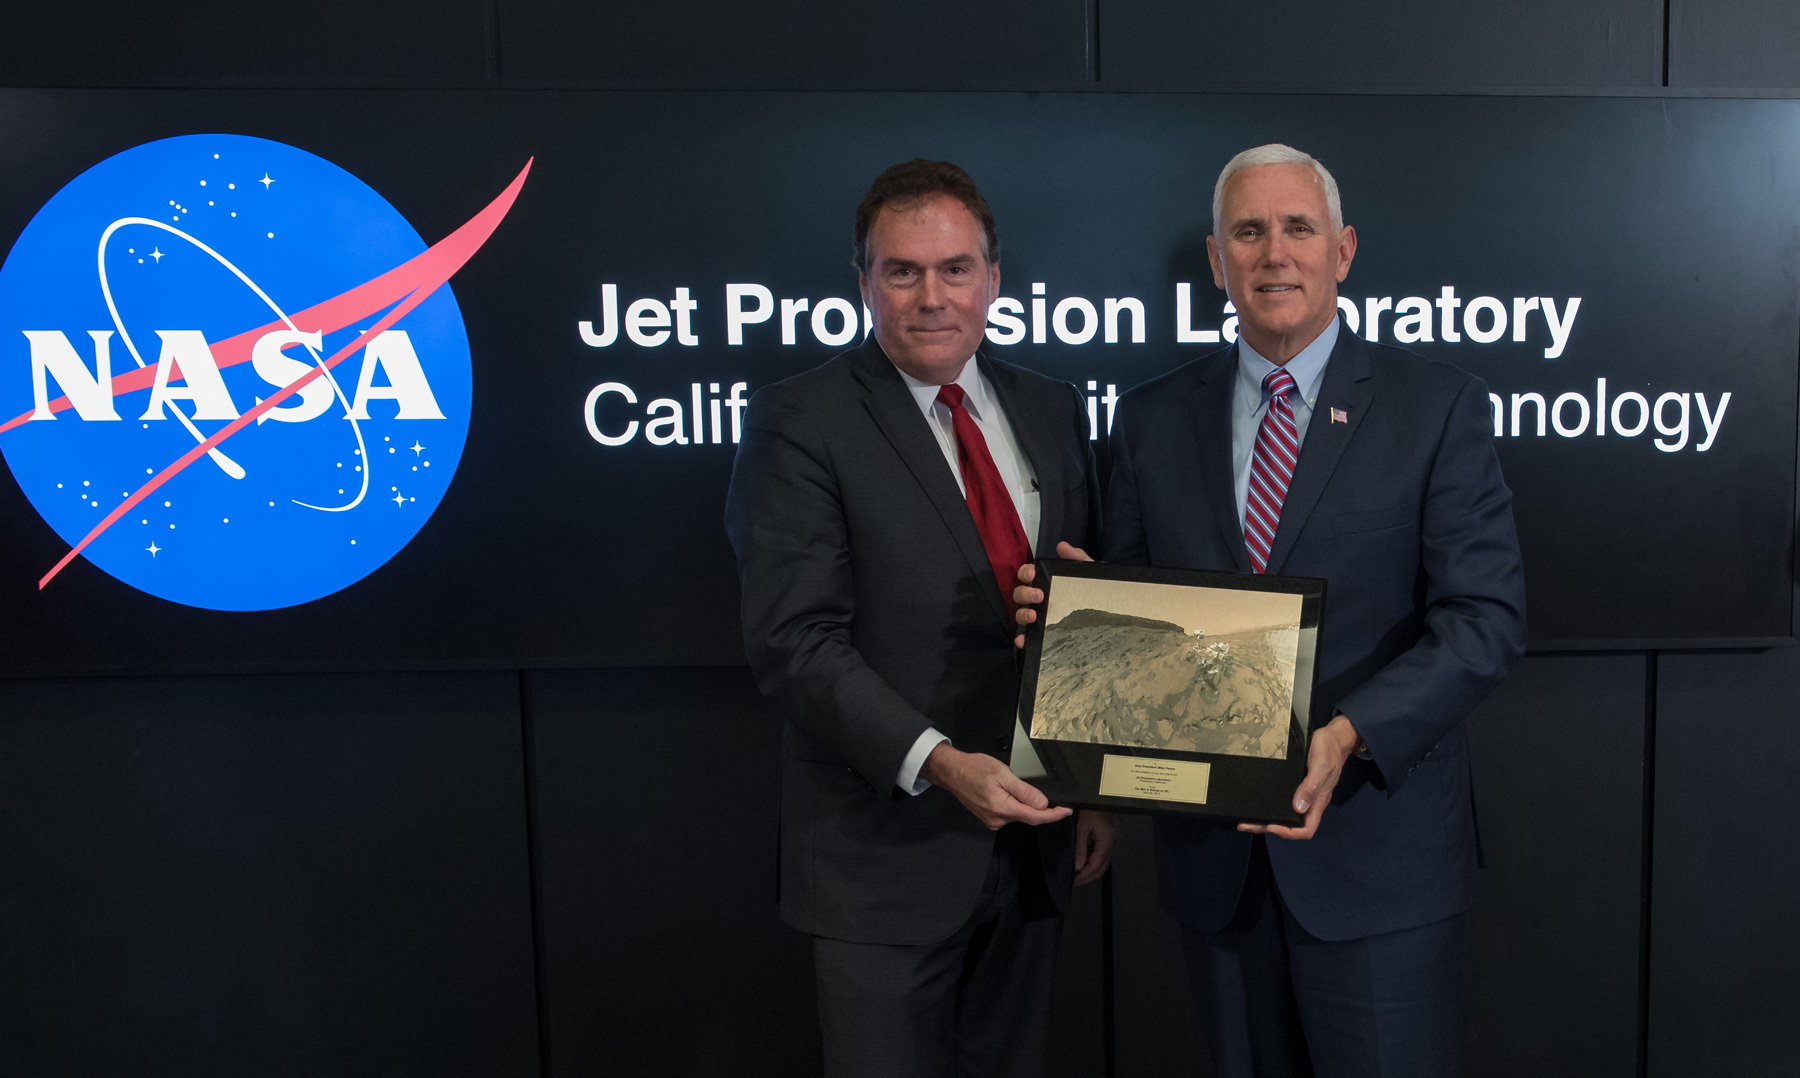 U.S. Vice President Mike Pence, right, is presented a plaque by JPL Director Michael Watkins during a tour of NASA's Jet Propulsion Laboratory, Saturday, April 28, 2018 in Pasadena, California. The plaque presents a view of the Mars Science Laboratory rover Curiosity on the surface of Mars. Photo Credit: (NASA/Bill Ingalls)